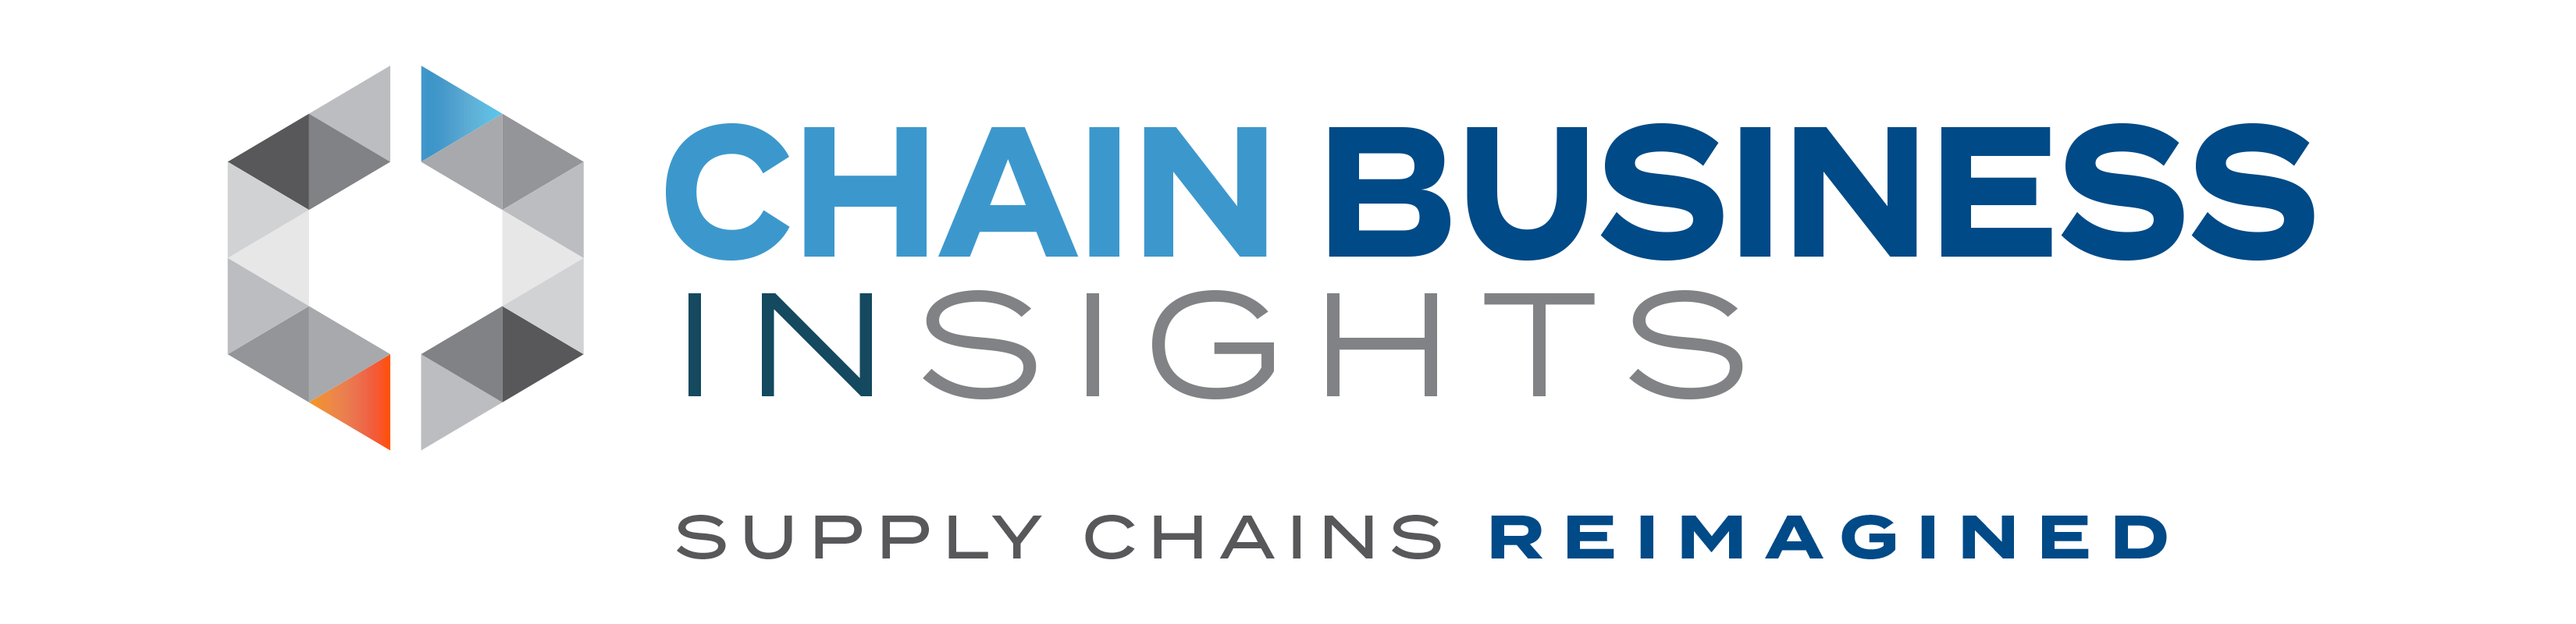 Chain Business Insights presents latest research on blockchain in the legal cannabis supply chain at SXSW